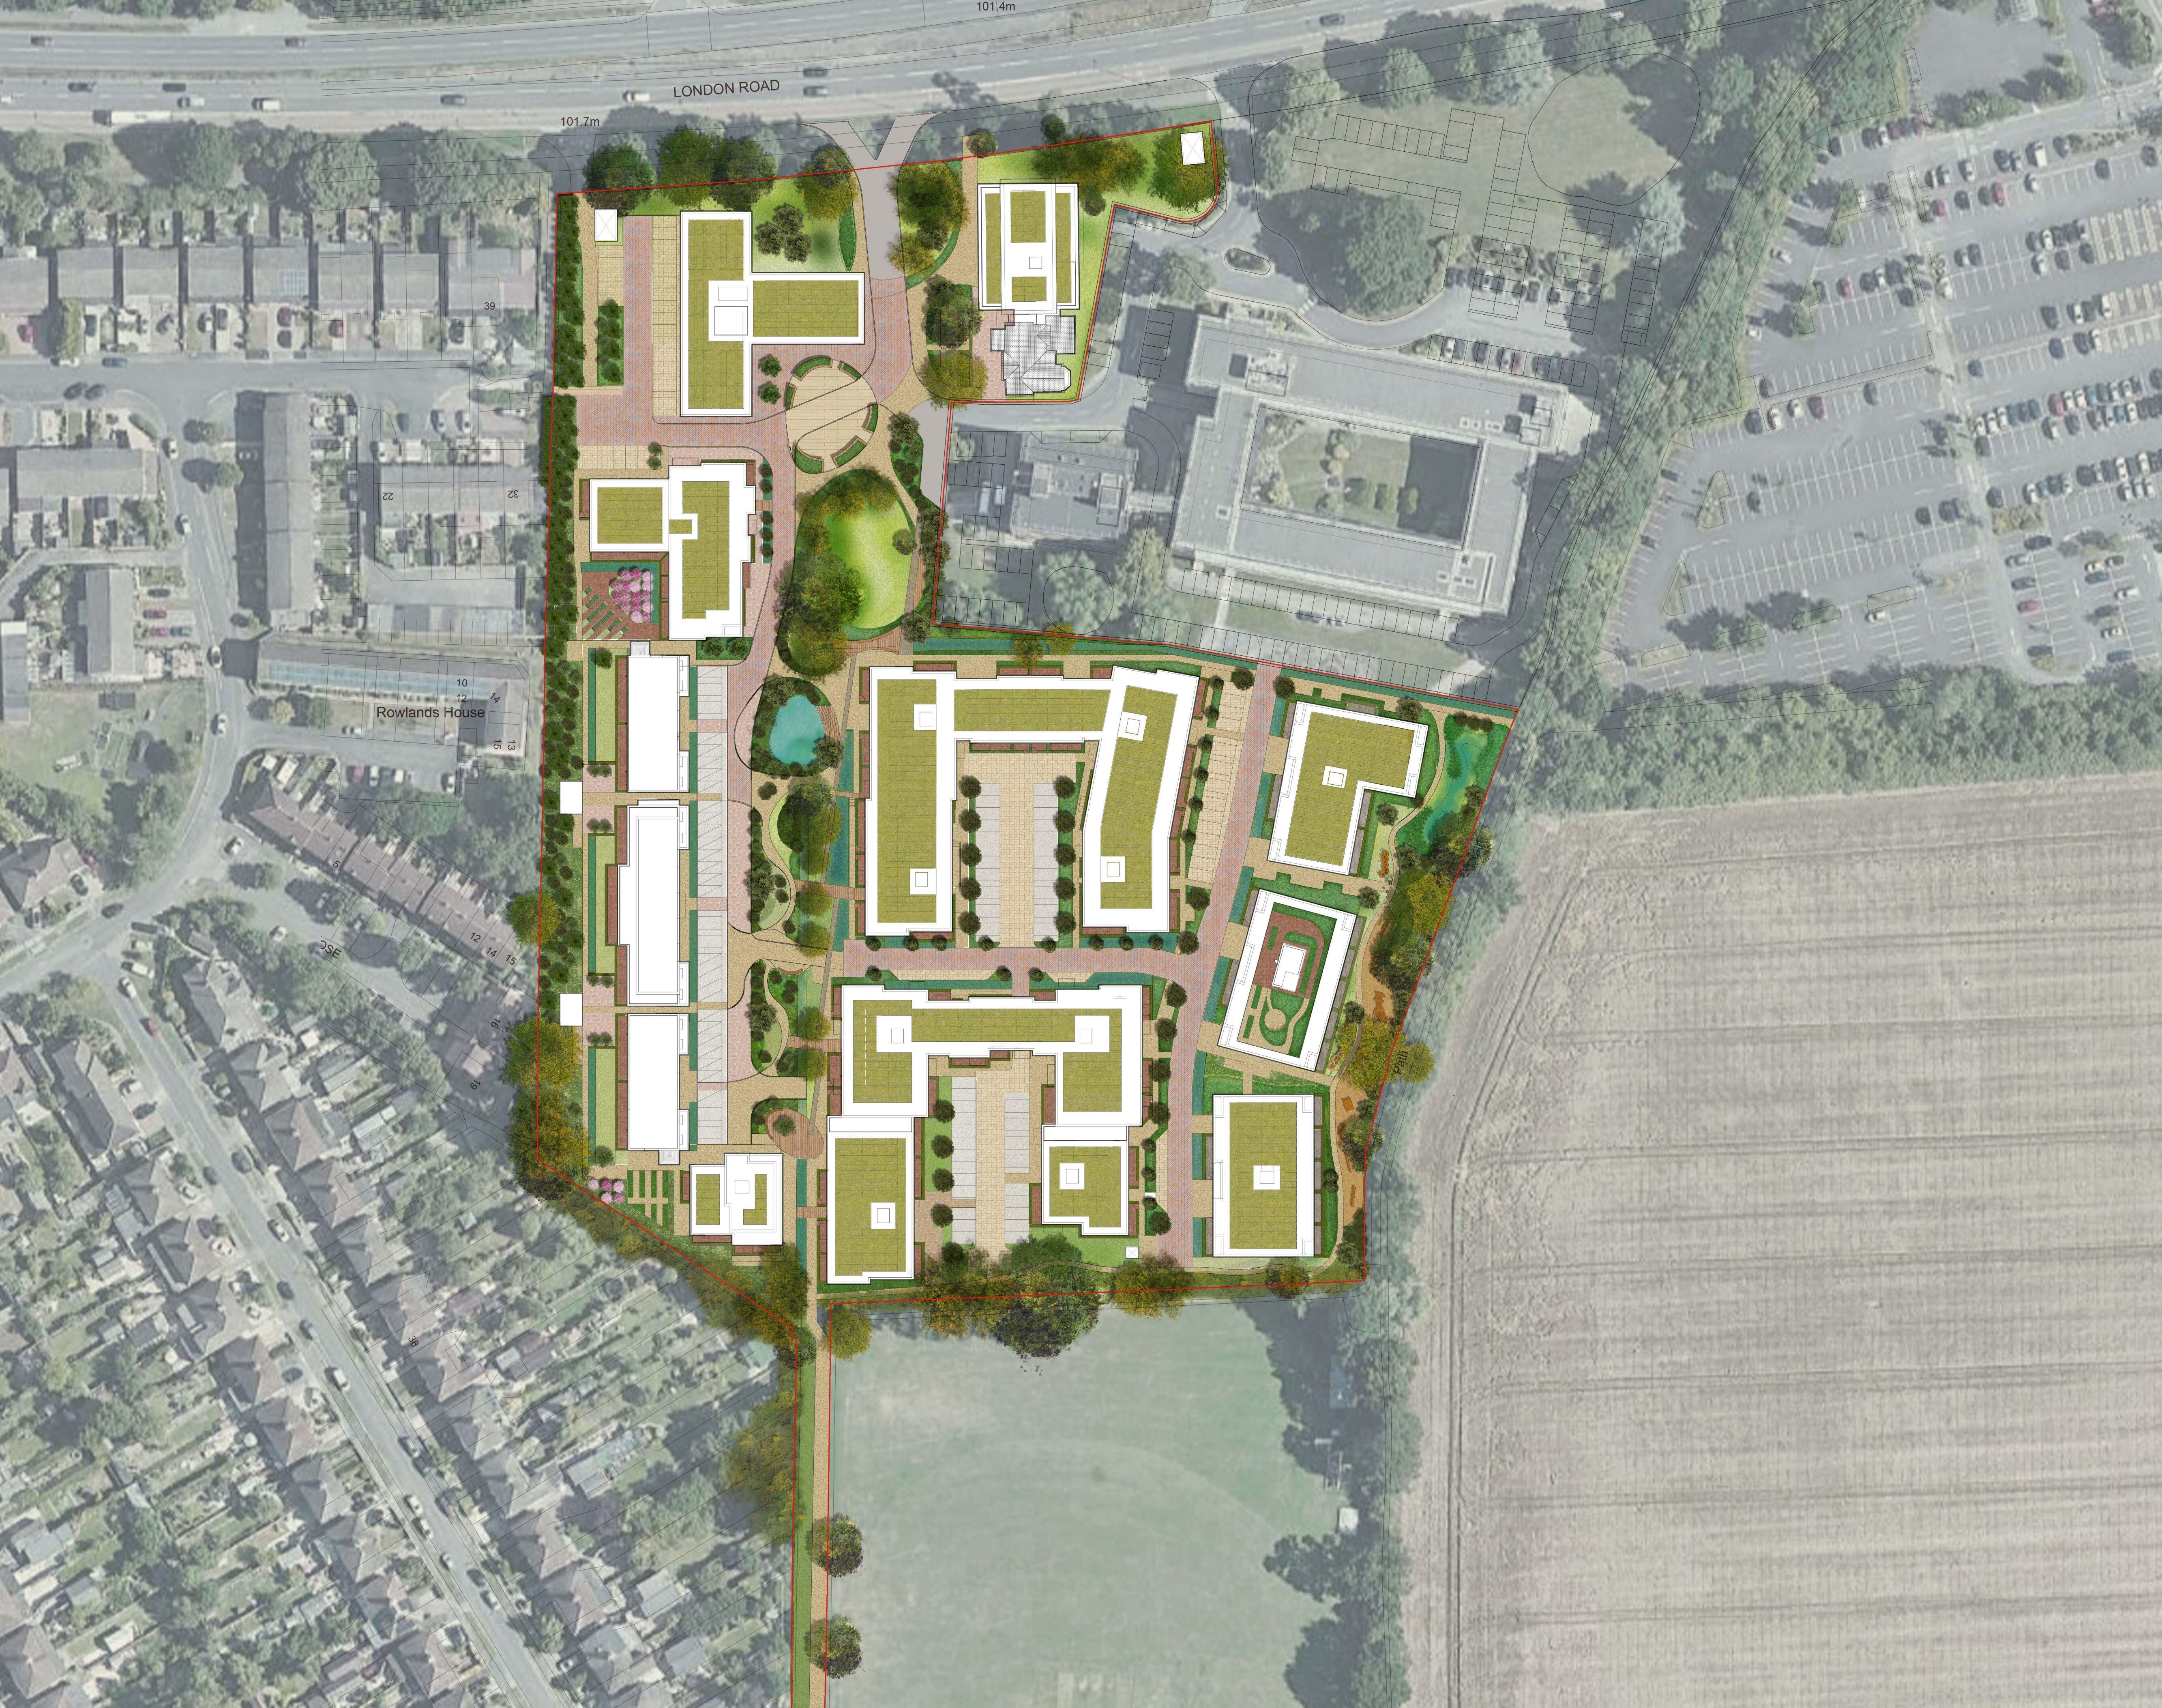 An illustrative masterplan for Thornhill Park. © BMD